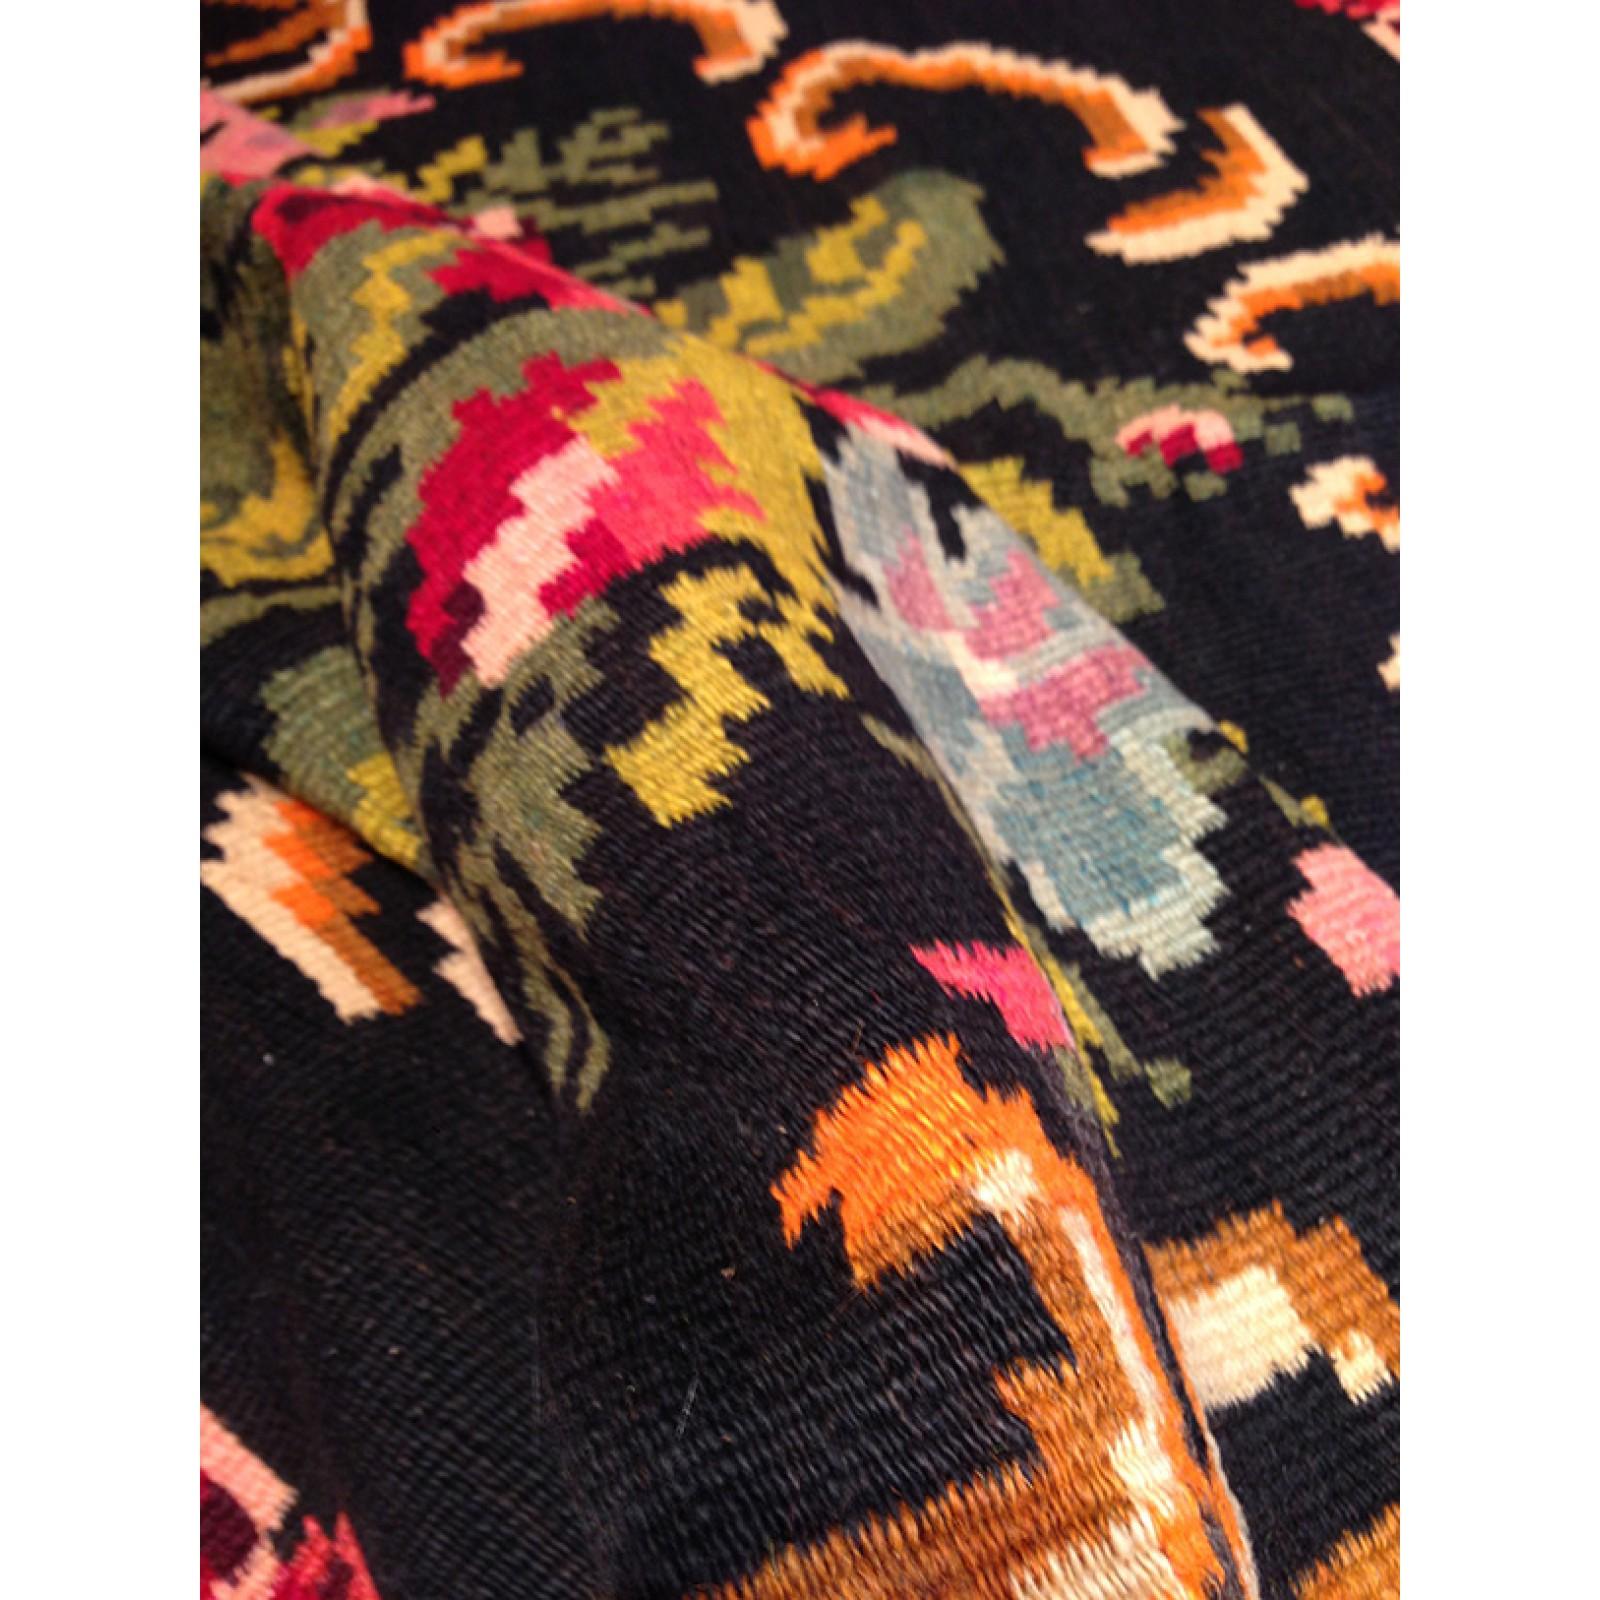 This is a Vintage Old Bessarabian Kilim Rug from Moldova with a rare and beautiful color composition.

Today it is a landlocked country in Eastern Europe, bordering Romania and Ukraine. Although it is now an independent country, it has been ruled by